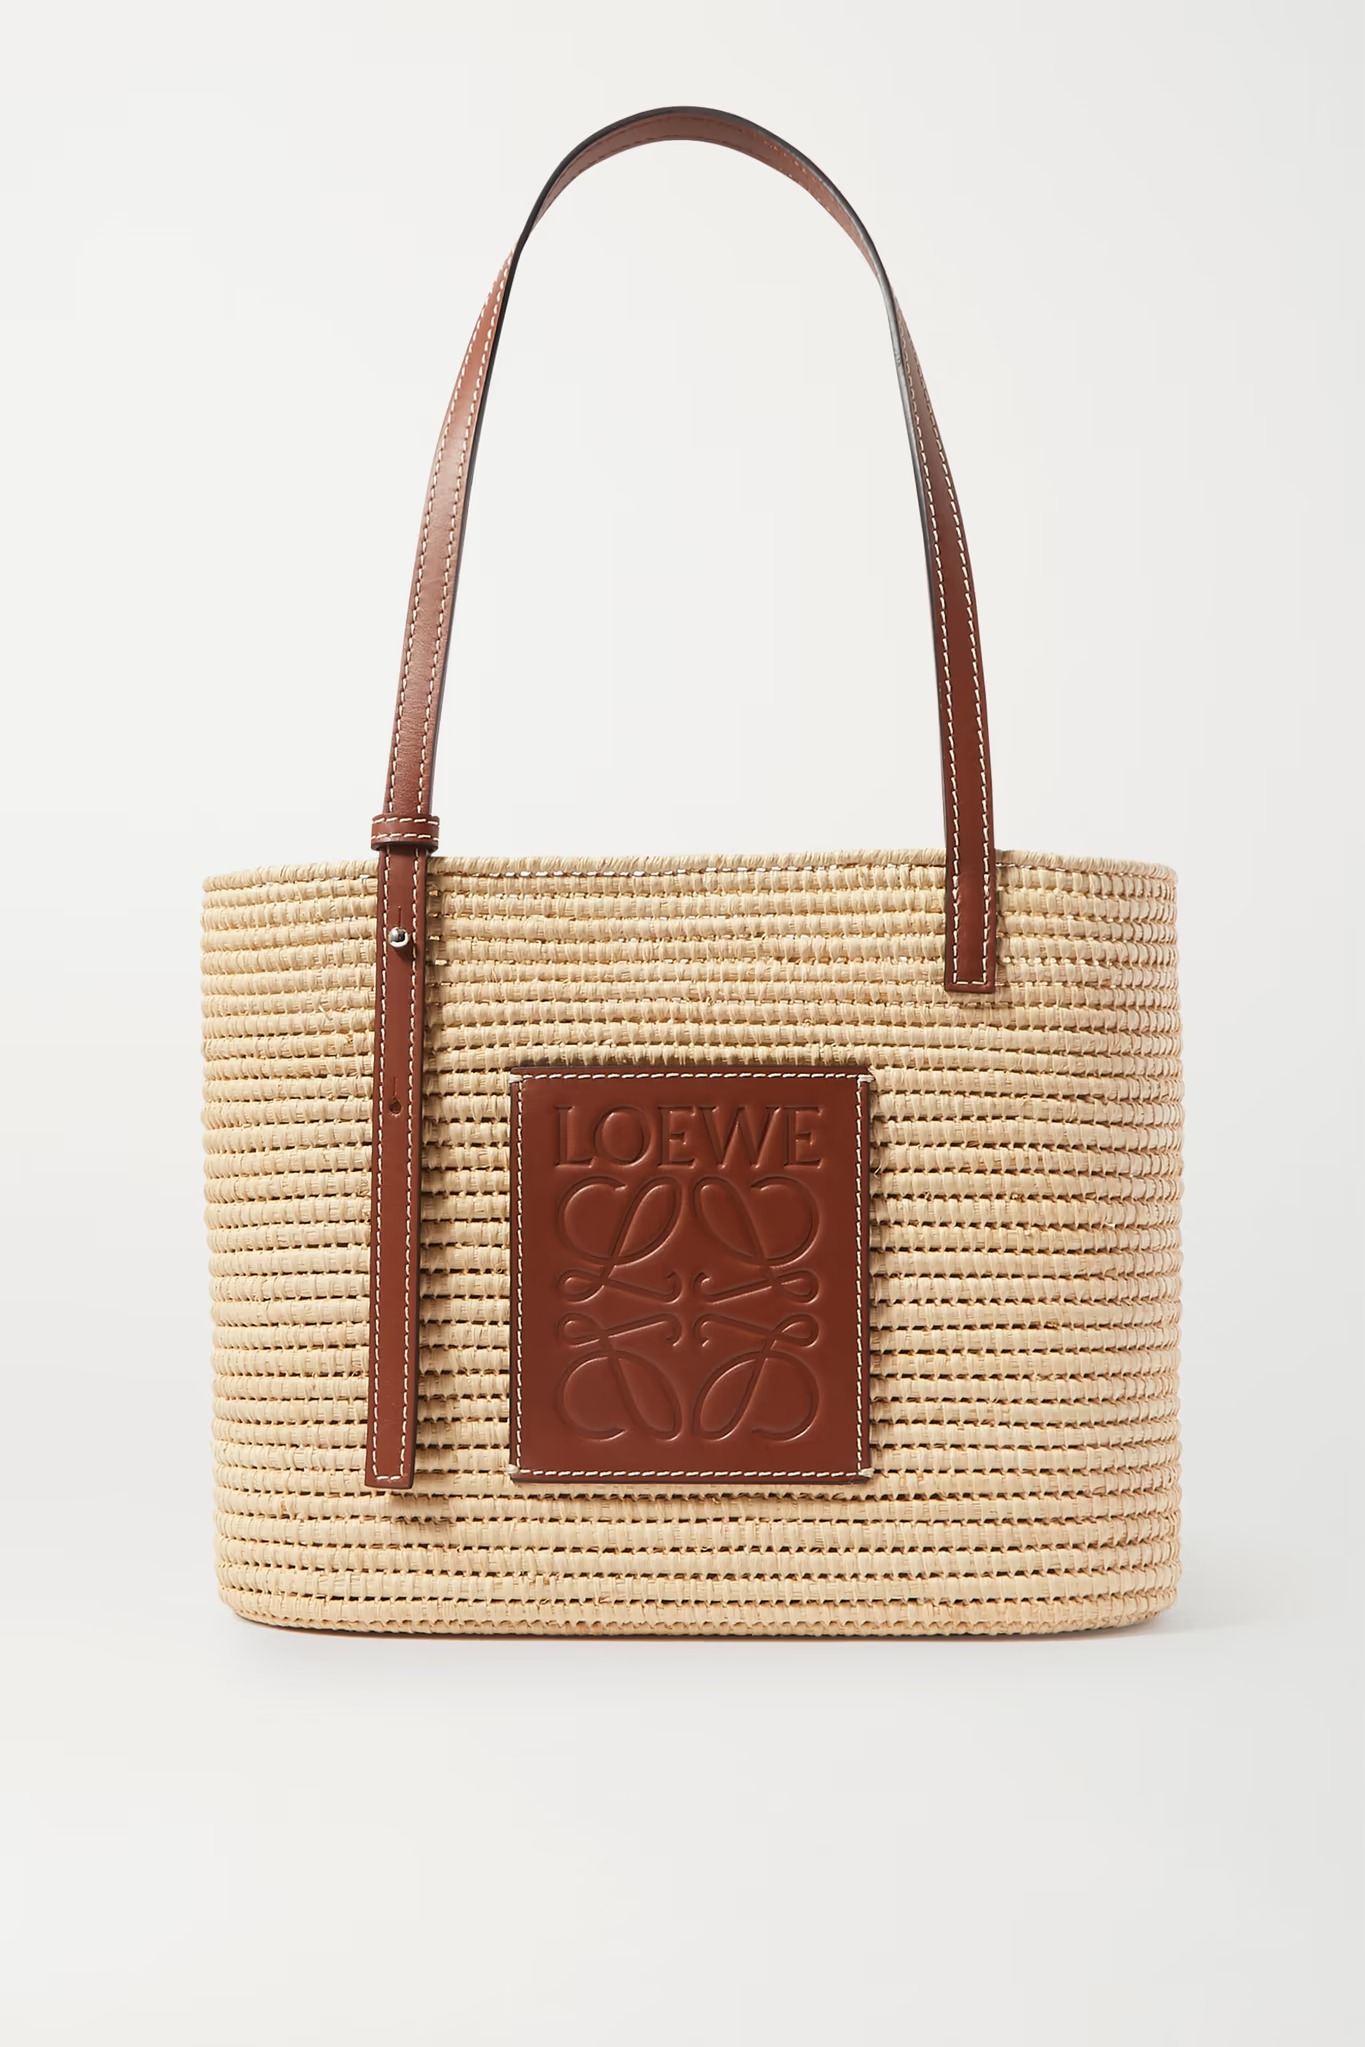 10 Summer Handbag Trends We Can't Stop Thinking About